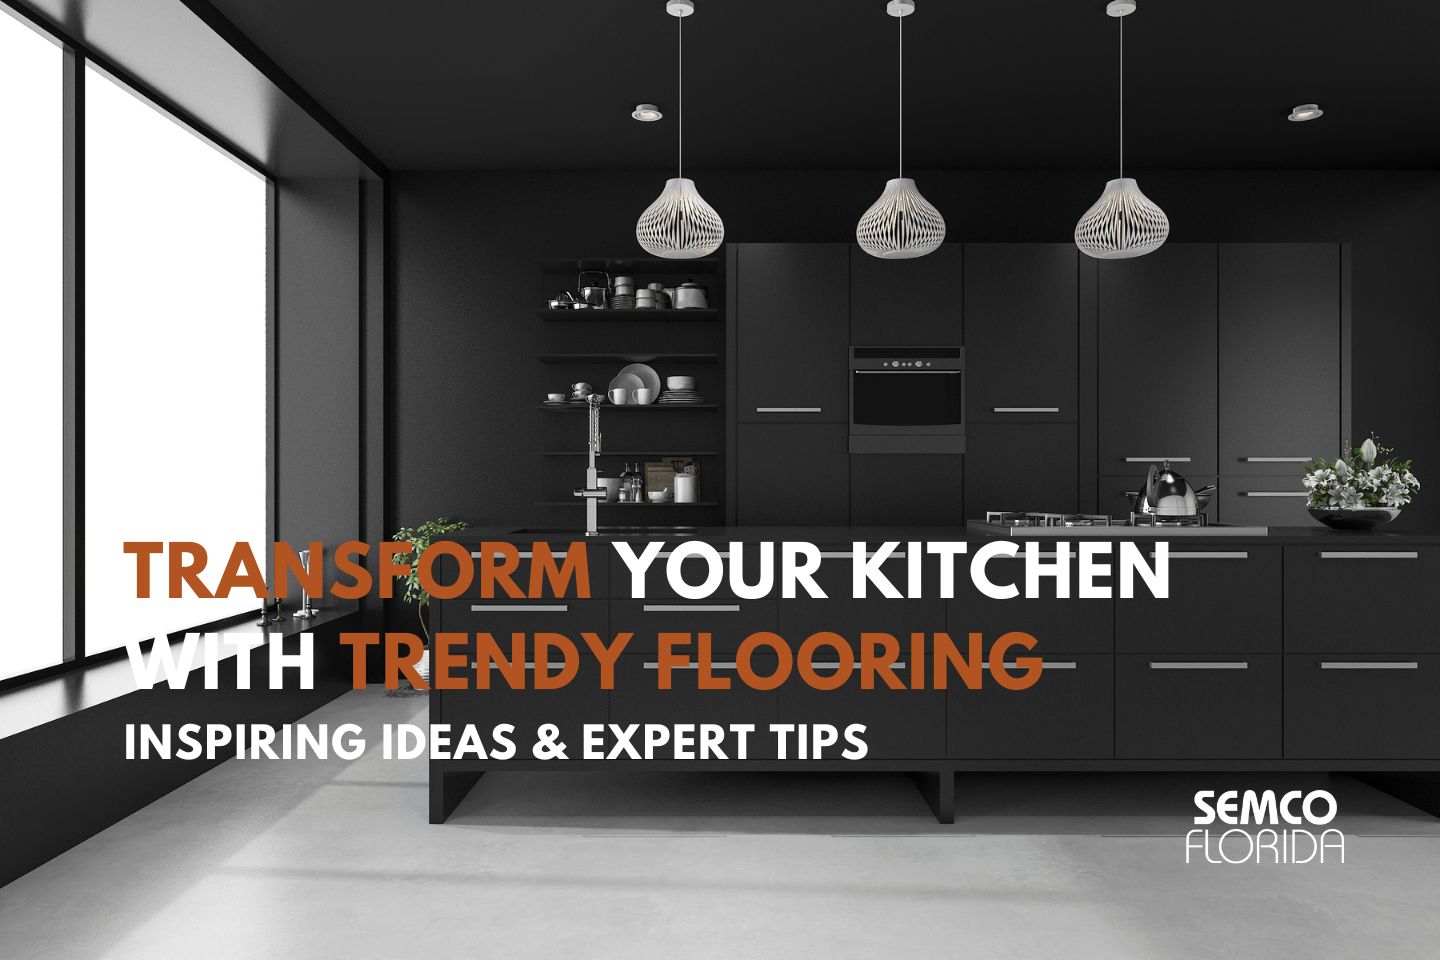 Transform Your Kitchen with Trendy Flooring Inspiring Ideas Expert Tips